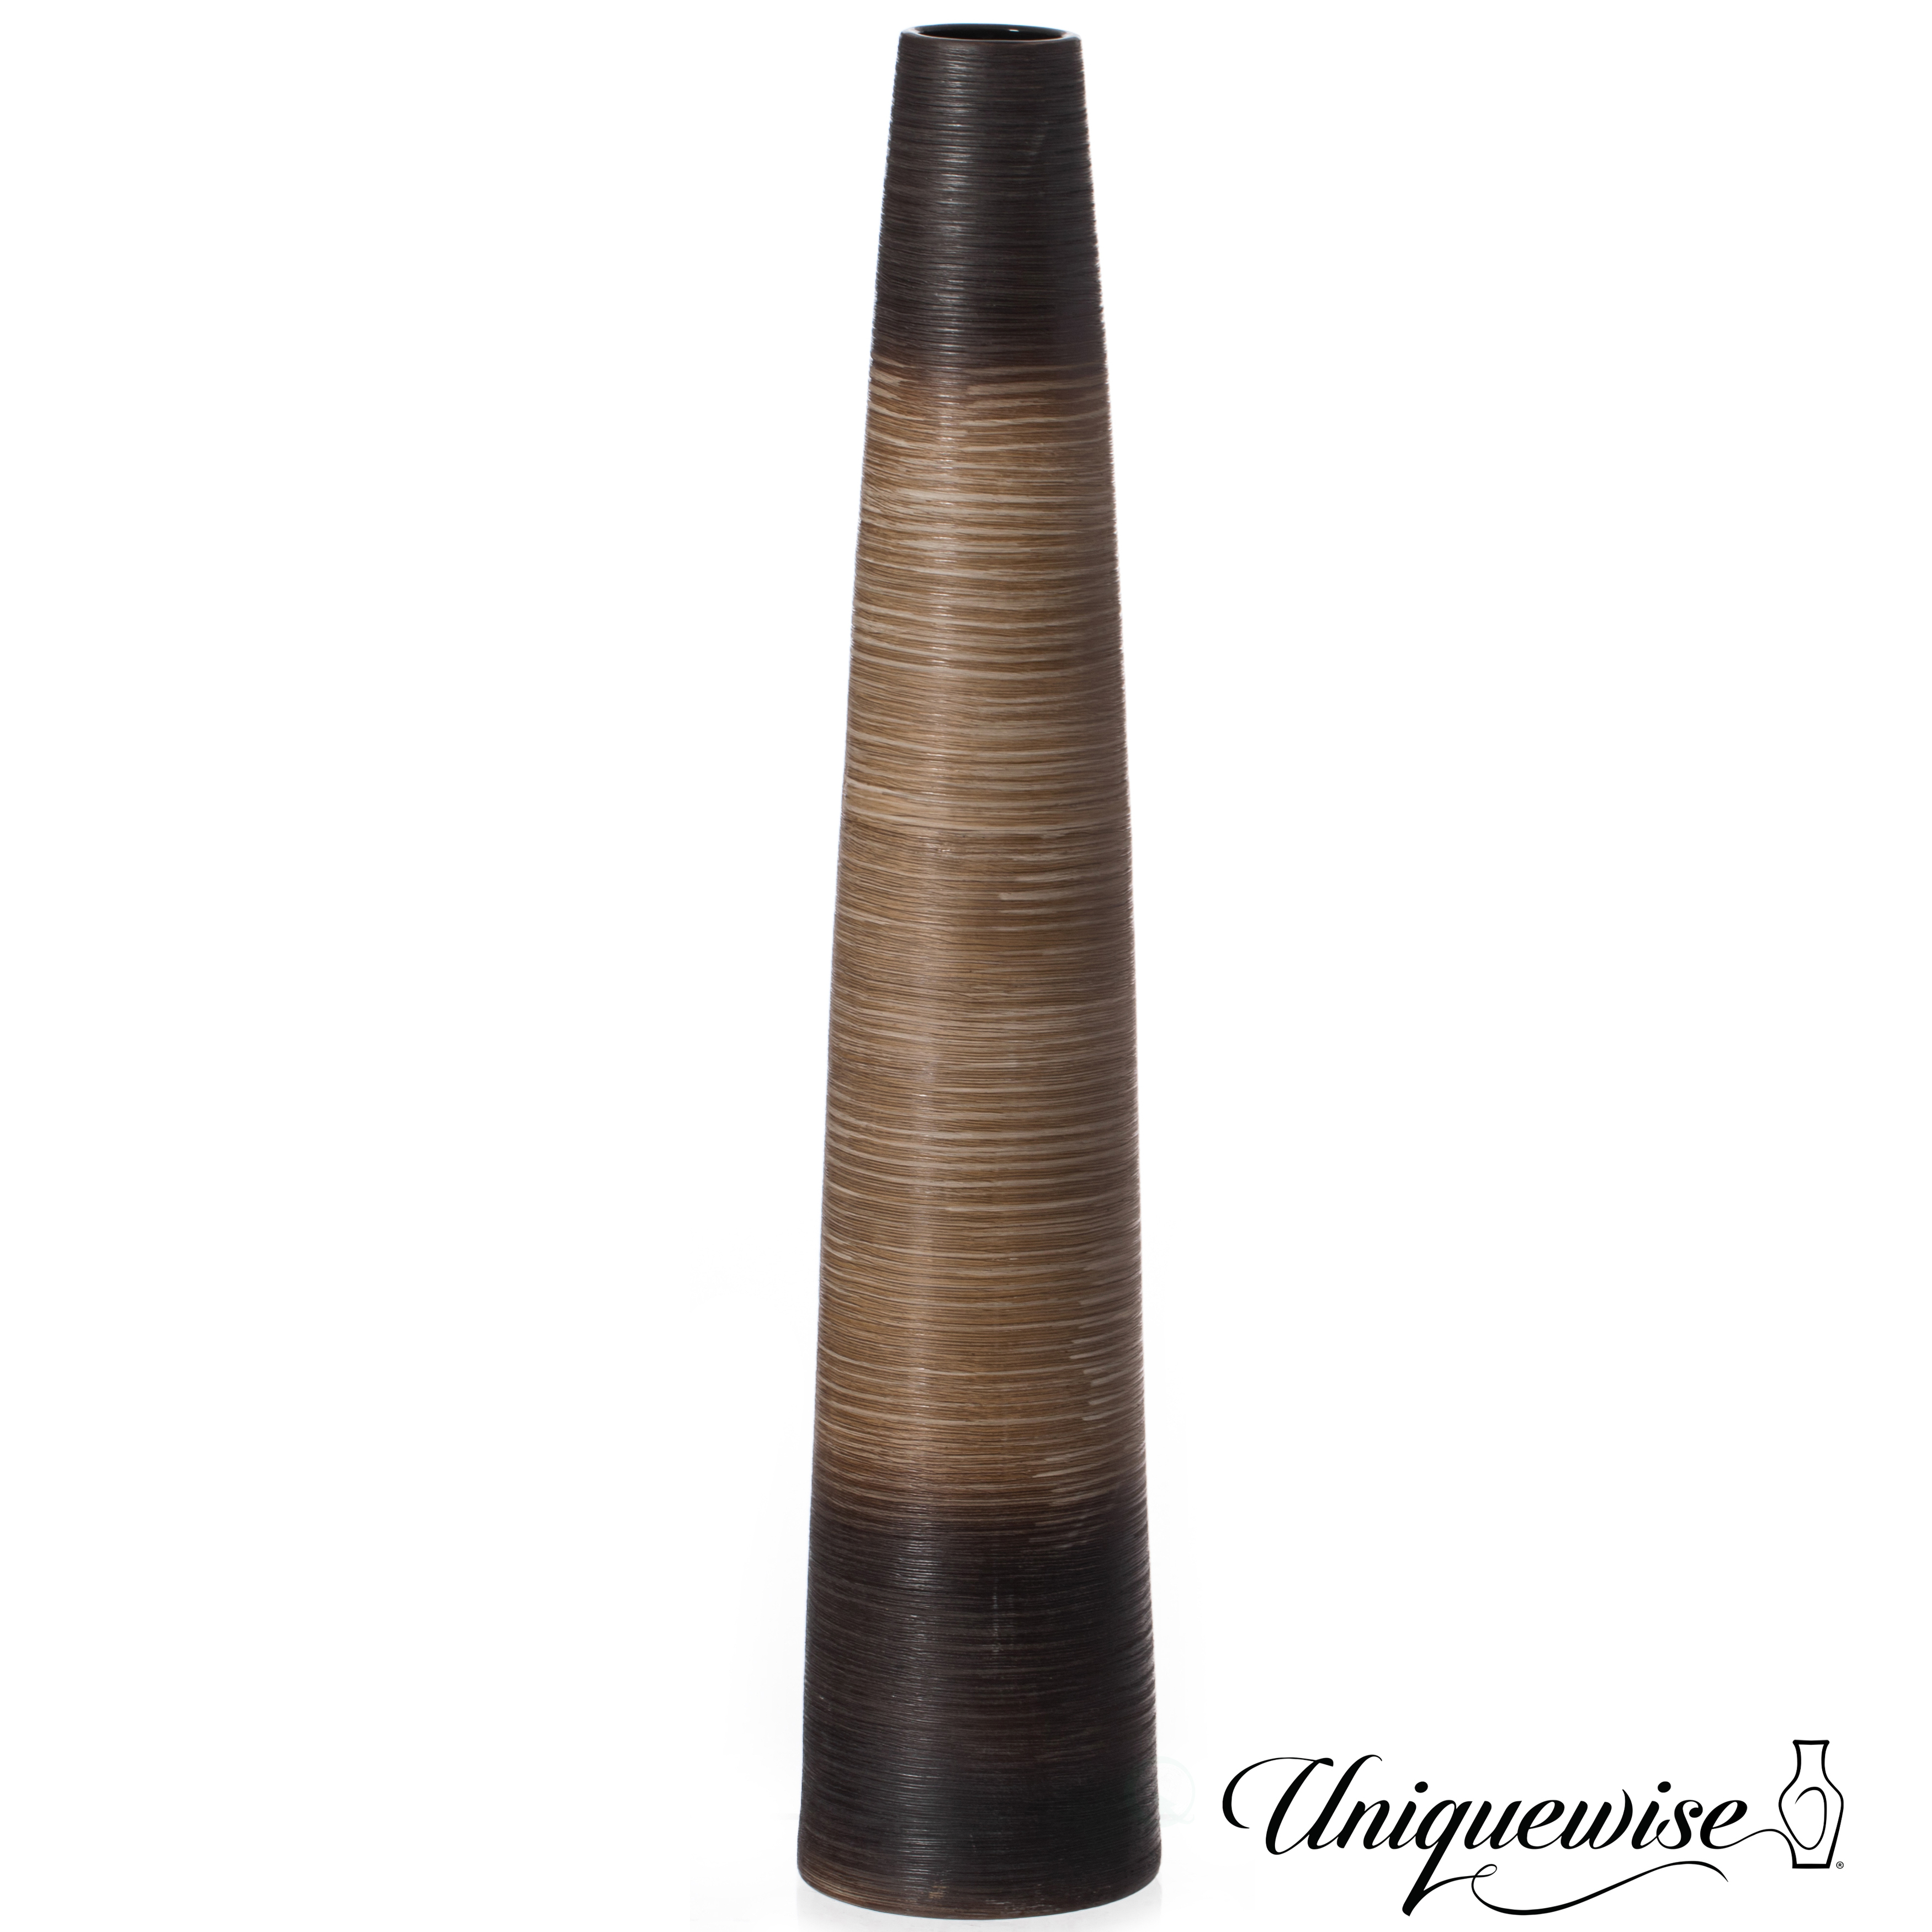 Tall Handcrafted Brown Ceramic Floor Vase - Waterproof Cylinder-Shaped Freestanding Design, Ideal For Tall Floral Arrangements - 31 In Tall